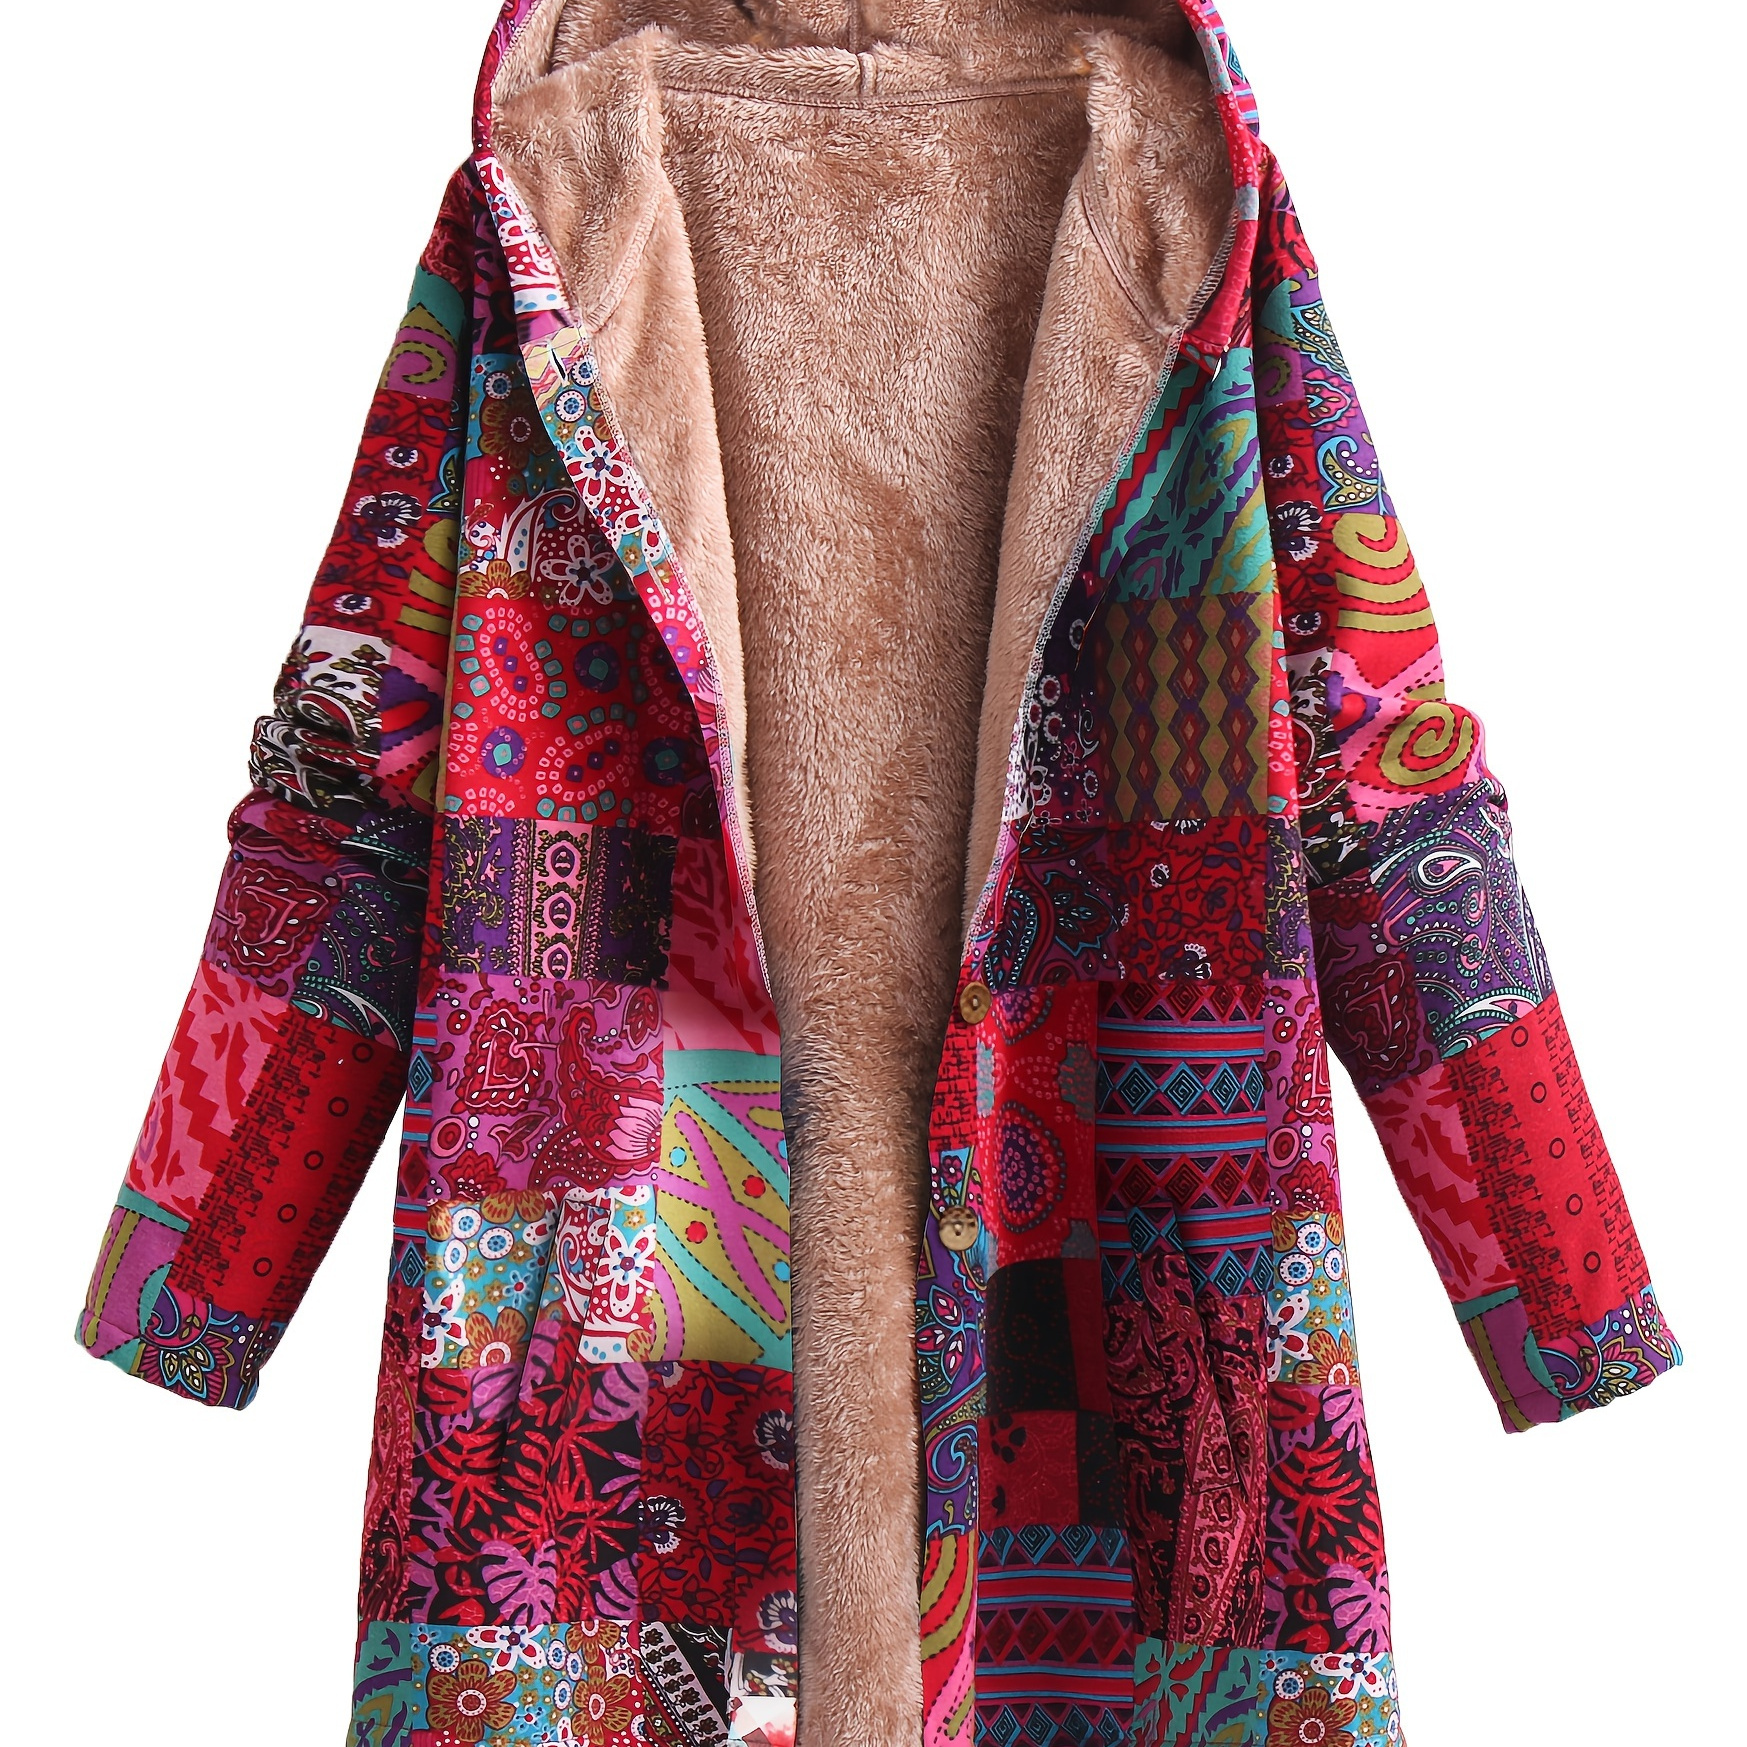 

Plus Size Boho Coat, Women's Plus Patchwork Print Liner Fleece Long Sleeve Button Up Hooded Tunic Coat With Pockets